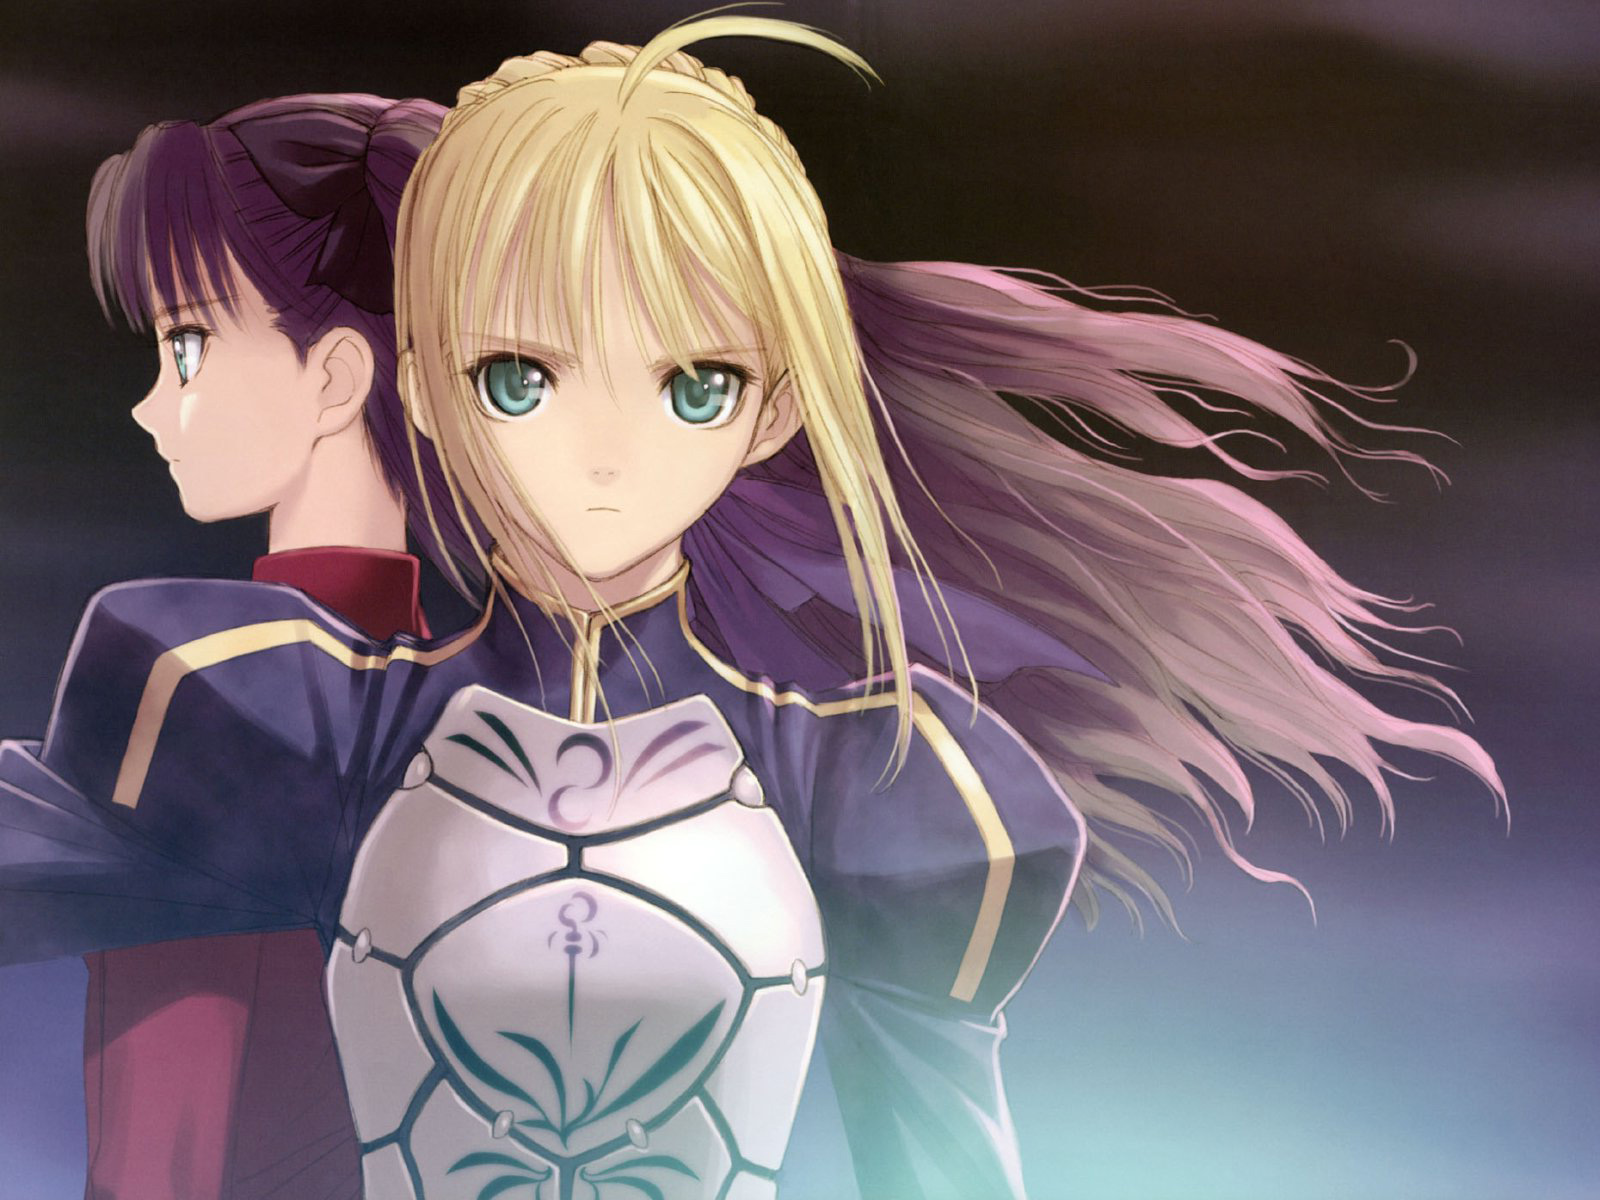 Saber and Rin Tohsaka from the Fate Series